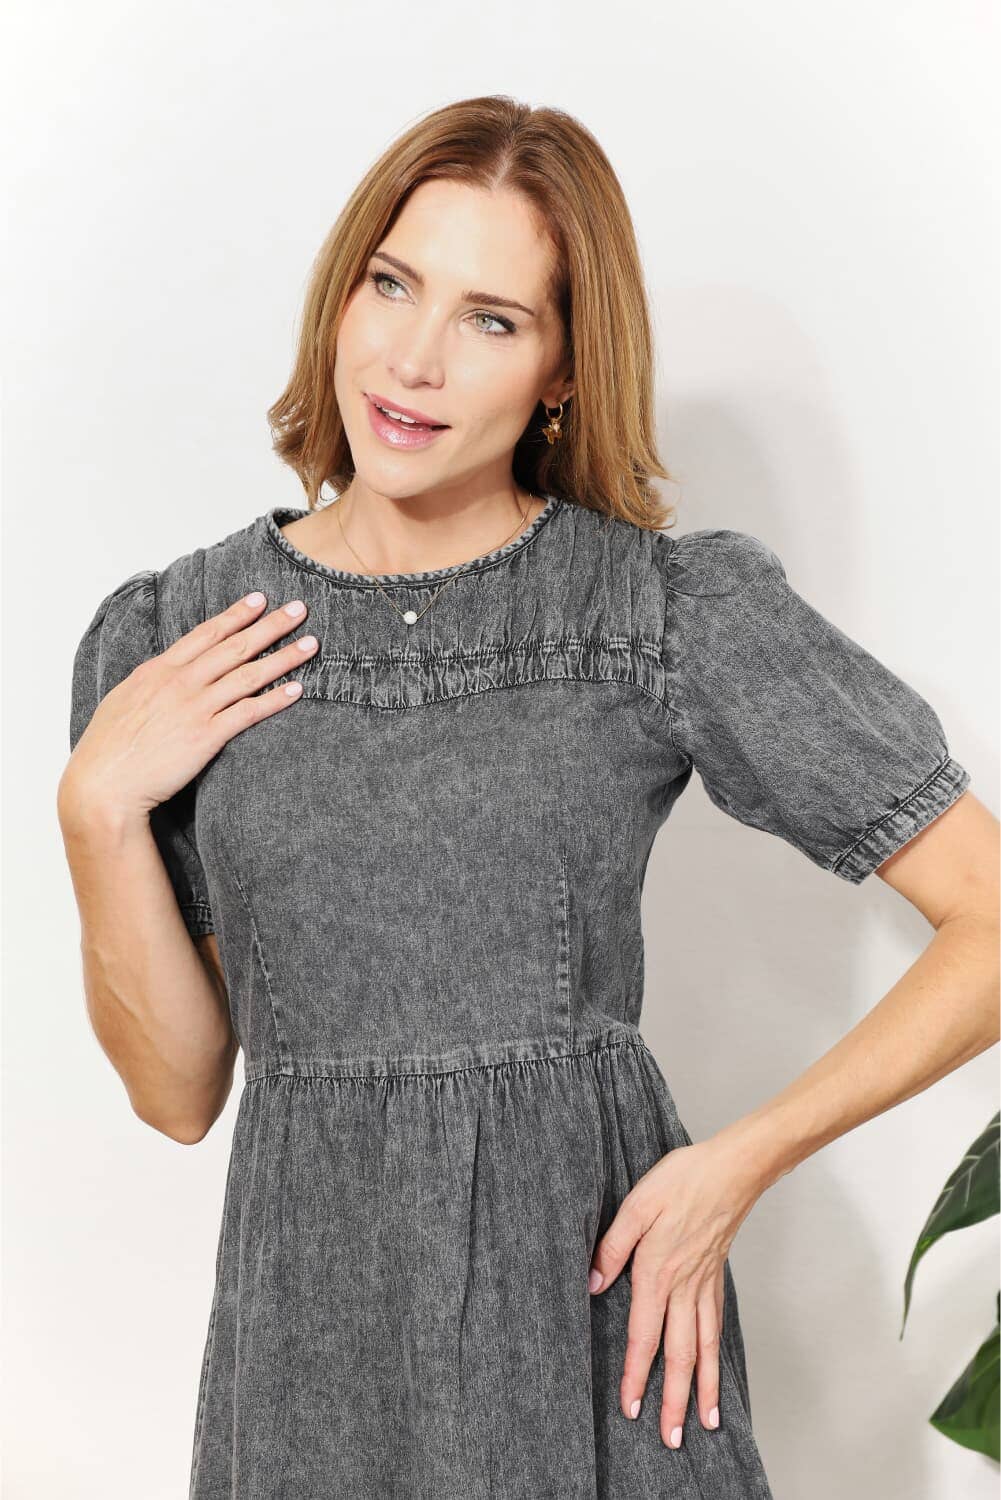 And The Why Charcoal Grey Round Neck Short Sleeves Washed Chambray Midi A Line Dress Dresses jehouze 